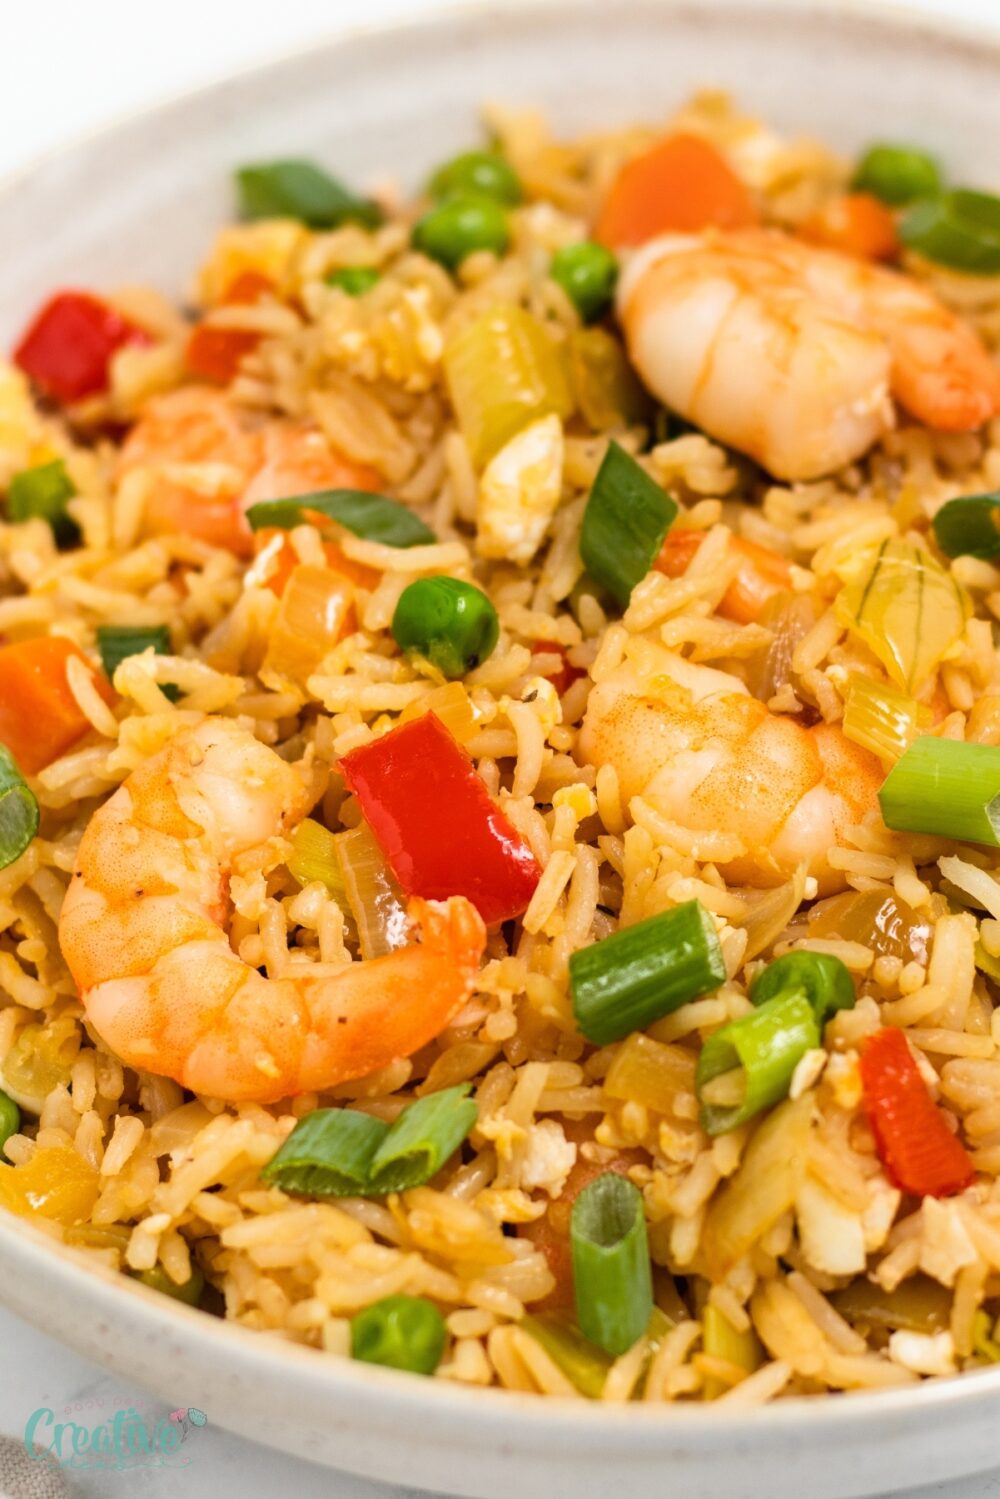 Prepare a delicious Asian shrimp fried rice dish with savory shrimps, fresh veggies, ideal for busy weeknights!